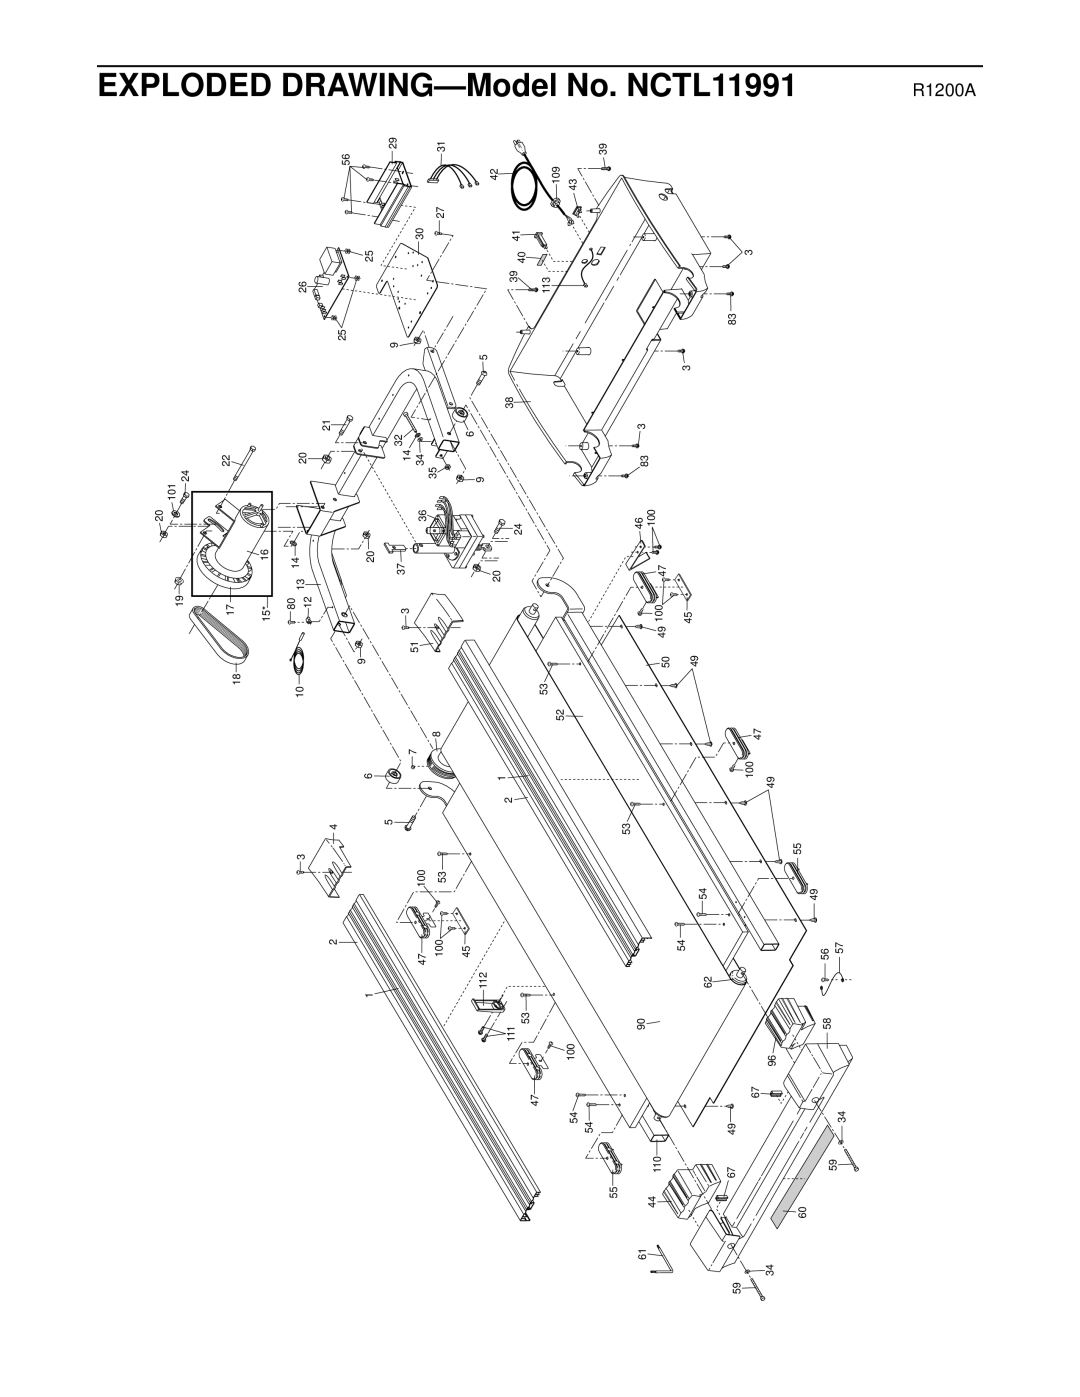 NordicTrack NCTL11991 user manual Exploded DRAWING-Model 